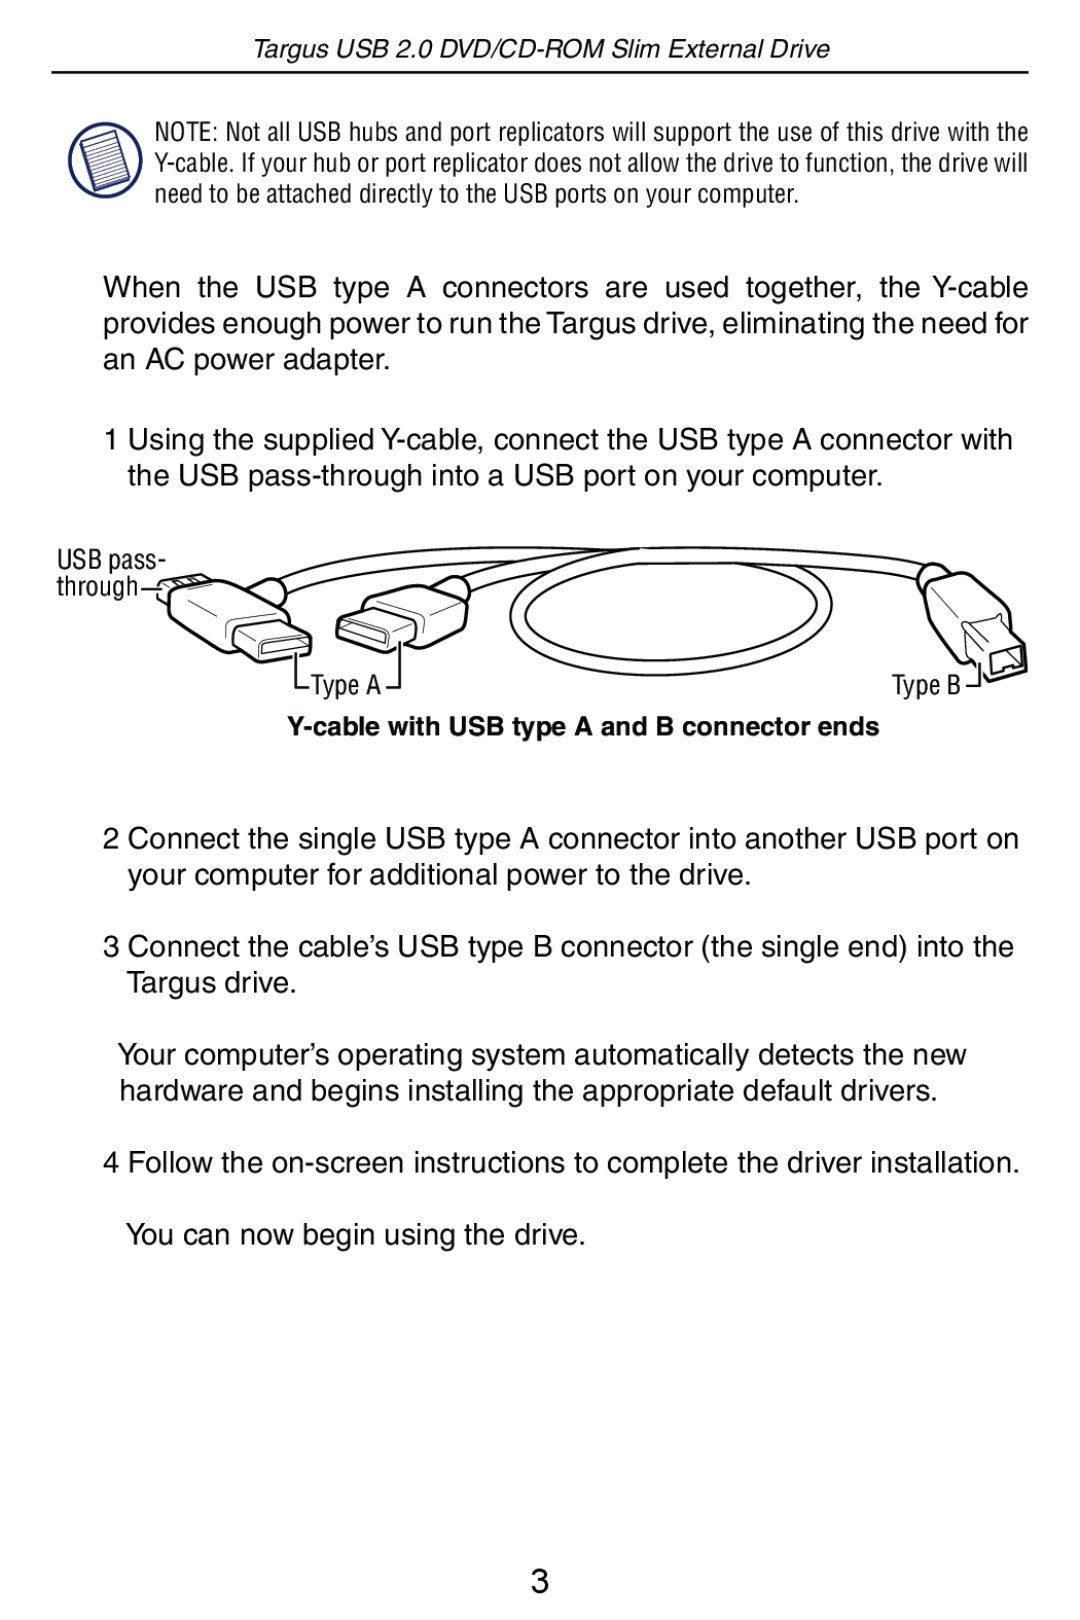 Targus USB 2.0 DVD/CD-ROM Slim External Drive specifications You can now begin using the drive 